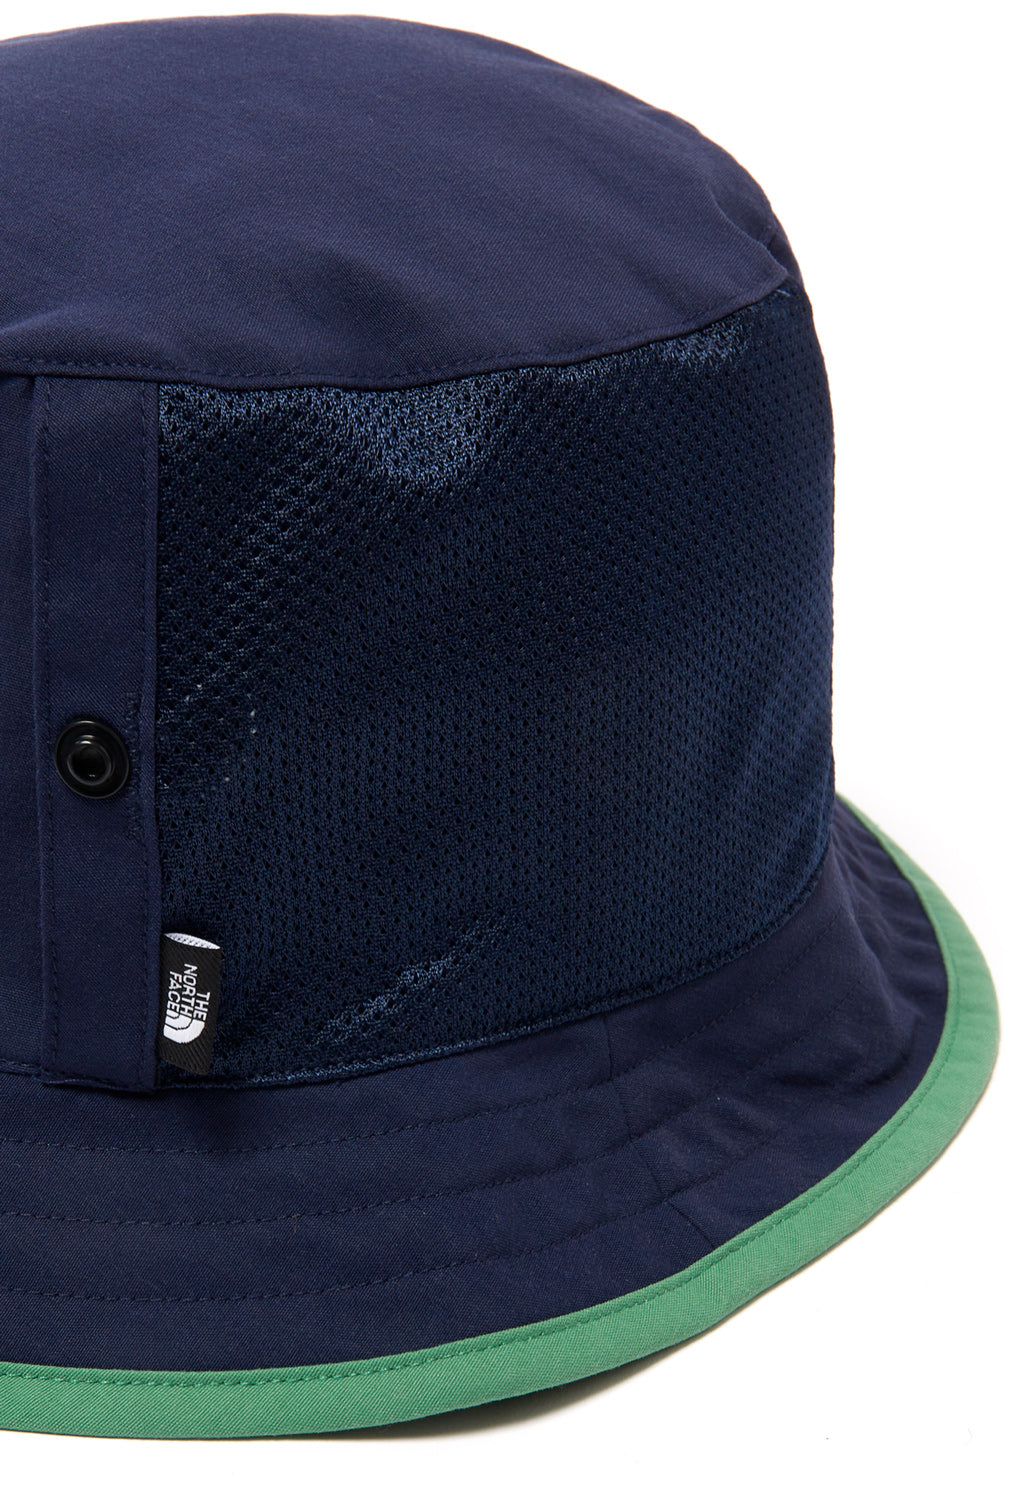 The North Face Class V Reversible Bucket Hat - Summit Navy/Deep Grass